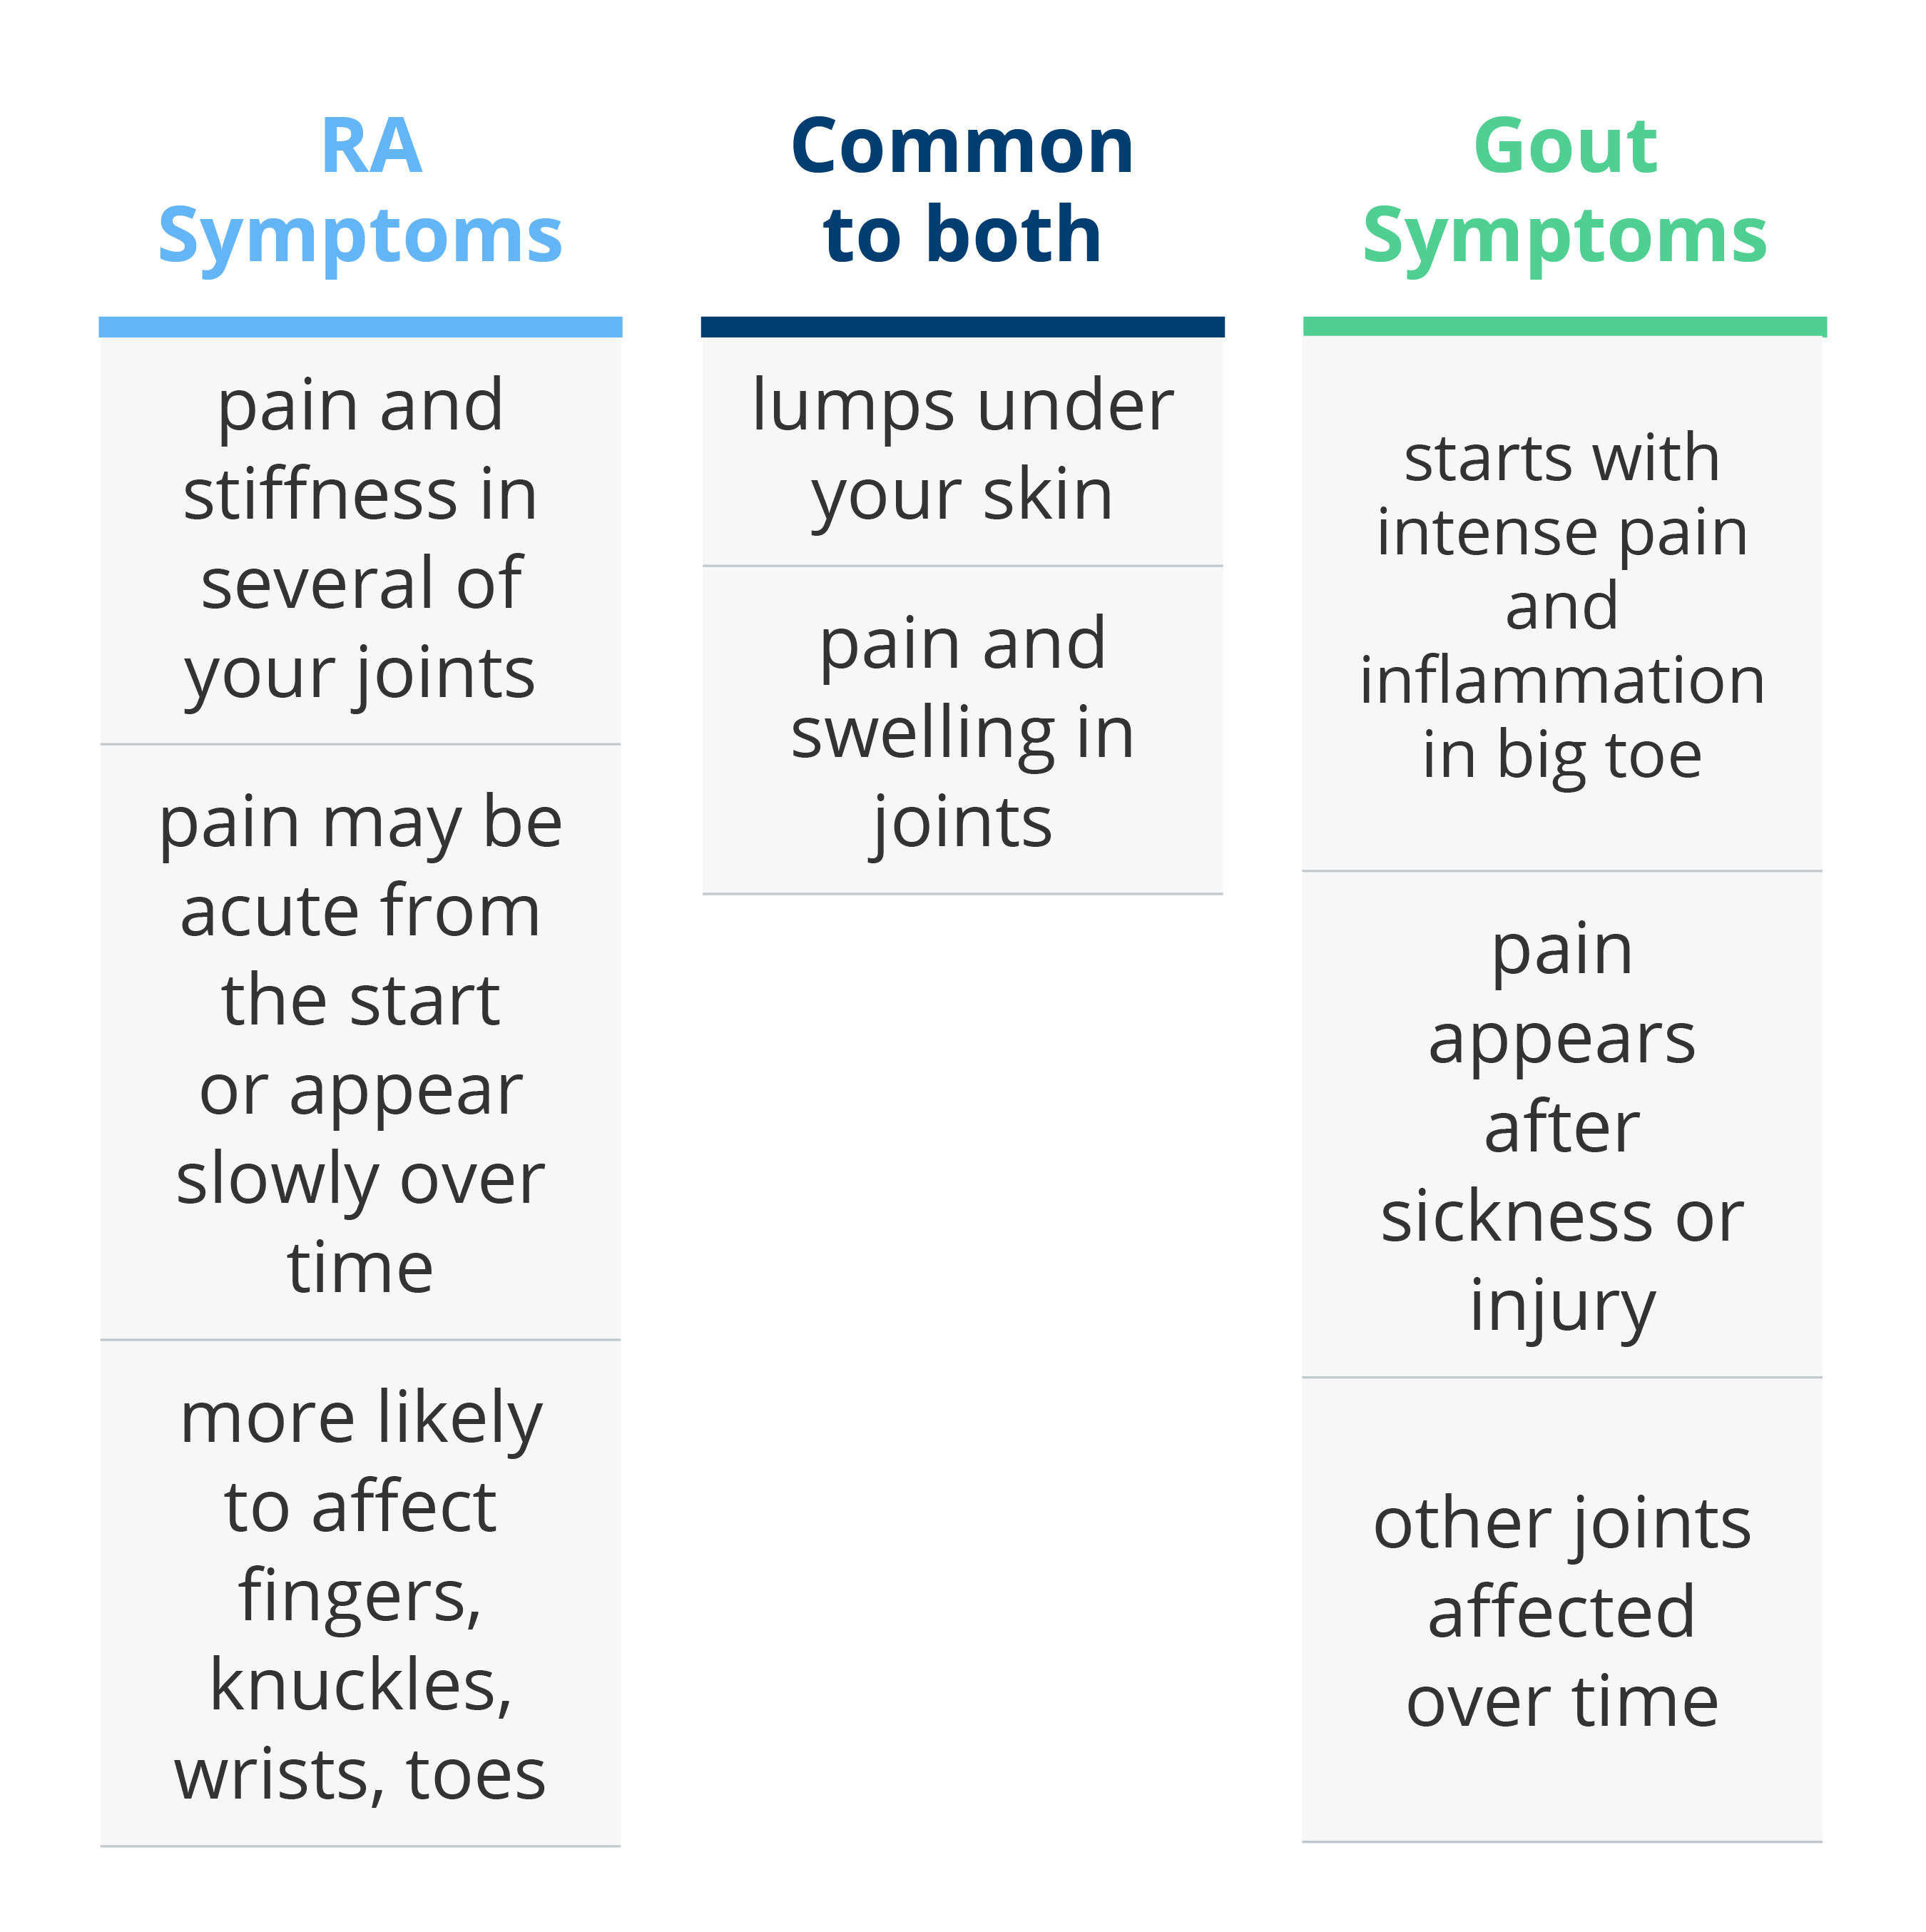 gout signs